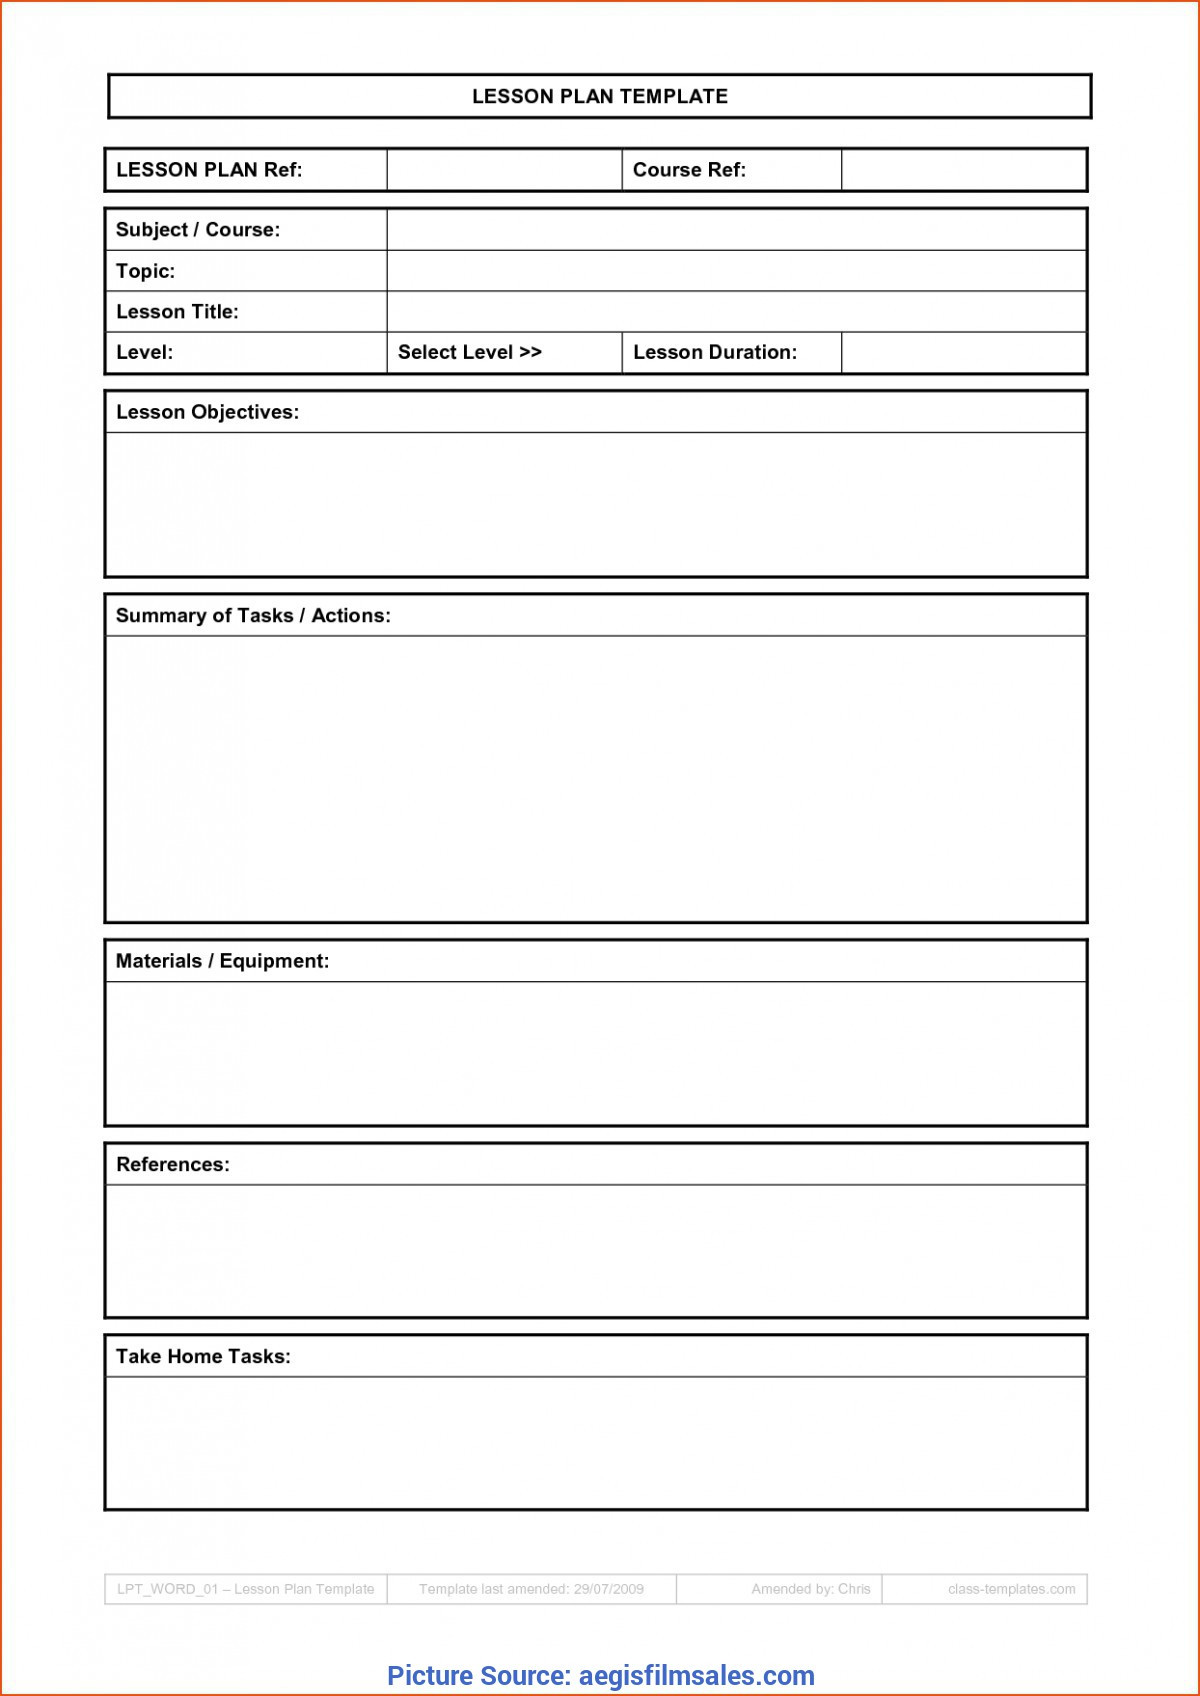 Basic Lesson Plan Template Ota Tech Find Lesson Template Ideas for Your Activity